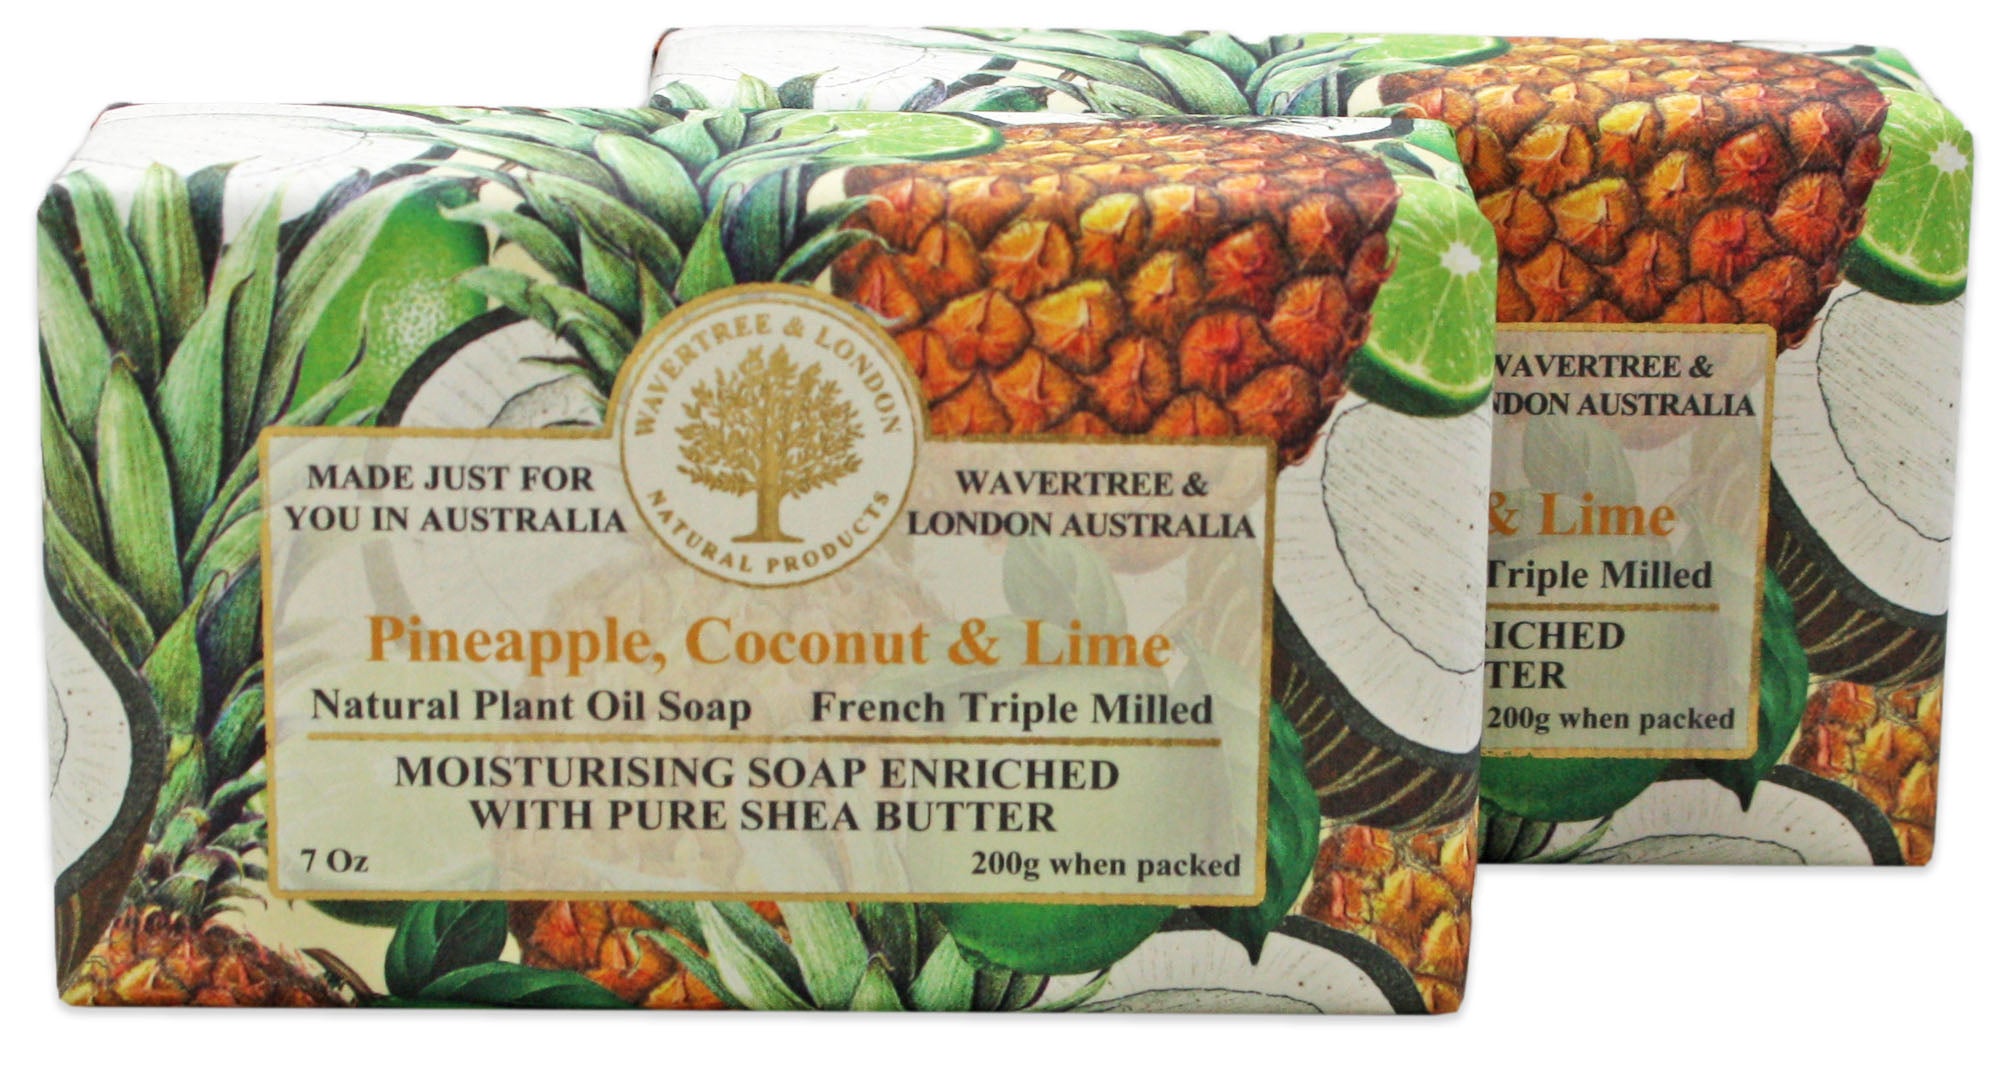 Wavertree & London Pineapple Coconut Lime (2 Bars), 7oz Moisturizing Natural Soap Bar, French -Milled and enriched with Shea Butter